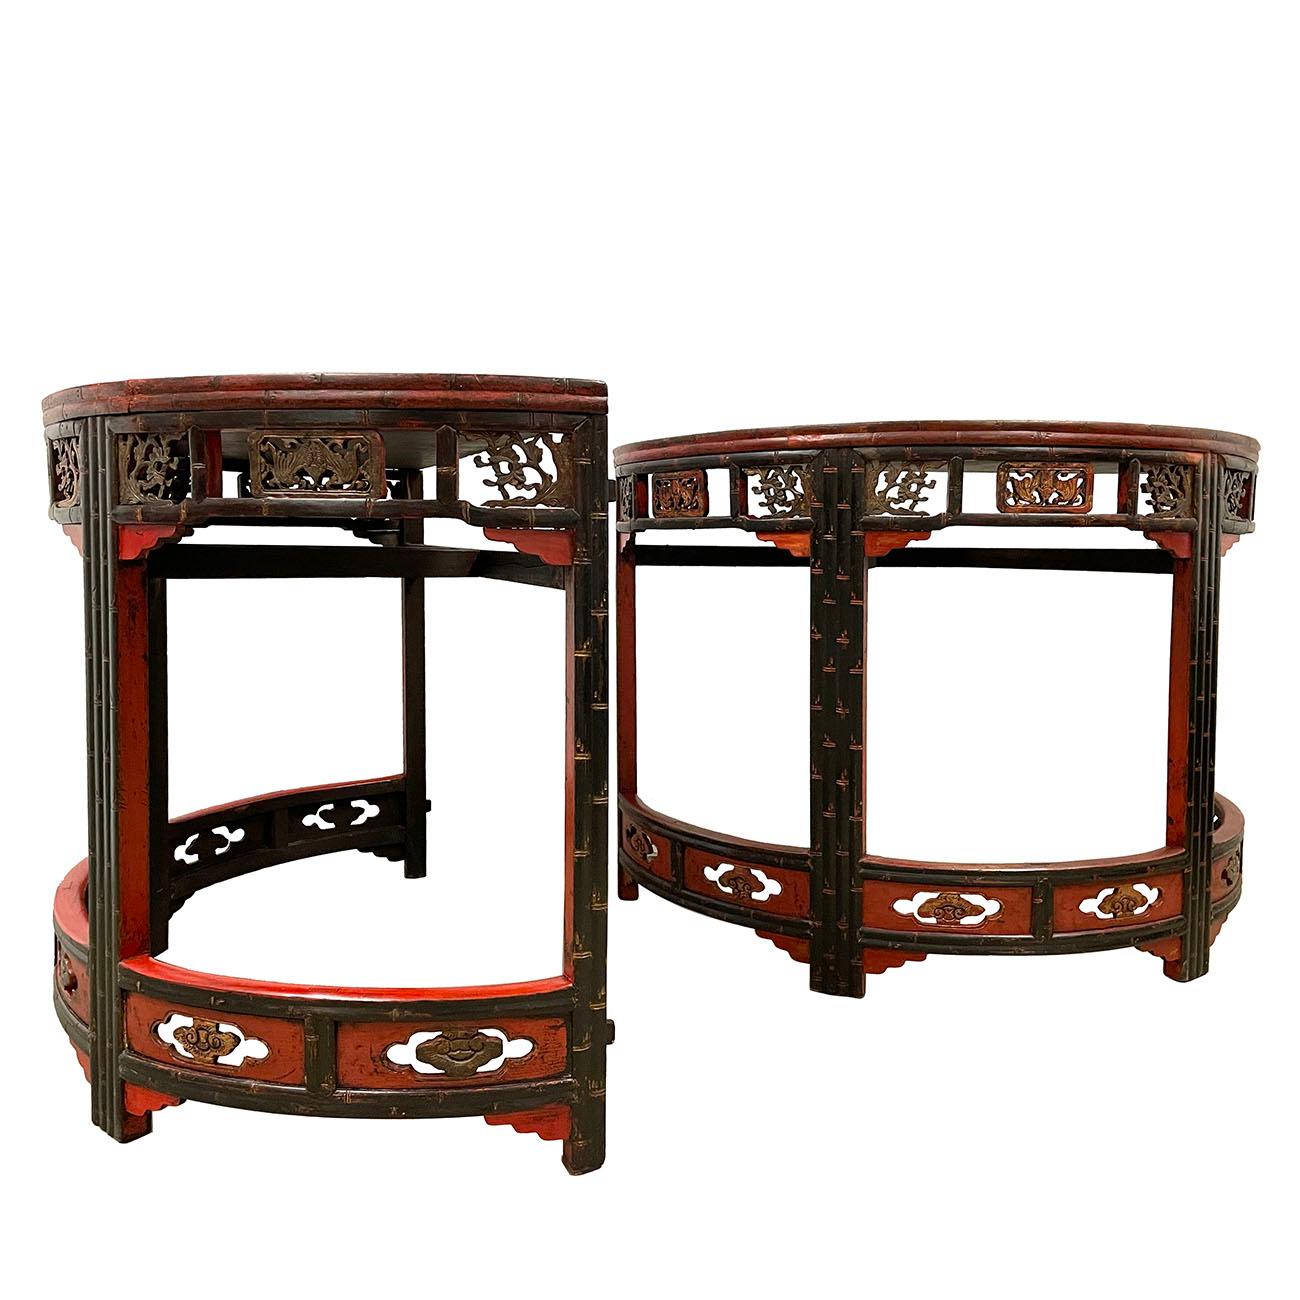 This gorgeous pair of Chinese Antique carved half moon table is made from solid wood with beautiful traditional carving works of bats and Ganoderma Lucidum design around table, meaning lucky and longevity. This tables has red and black lacquer